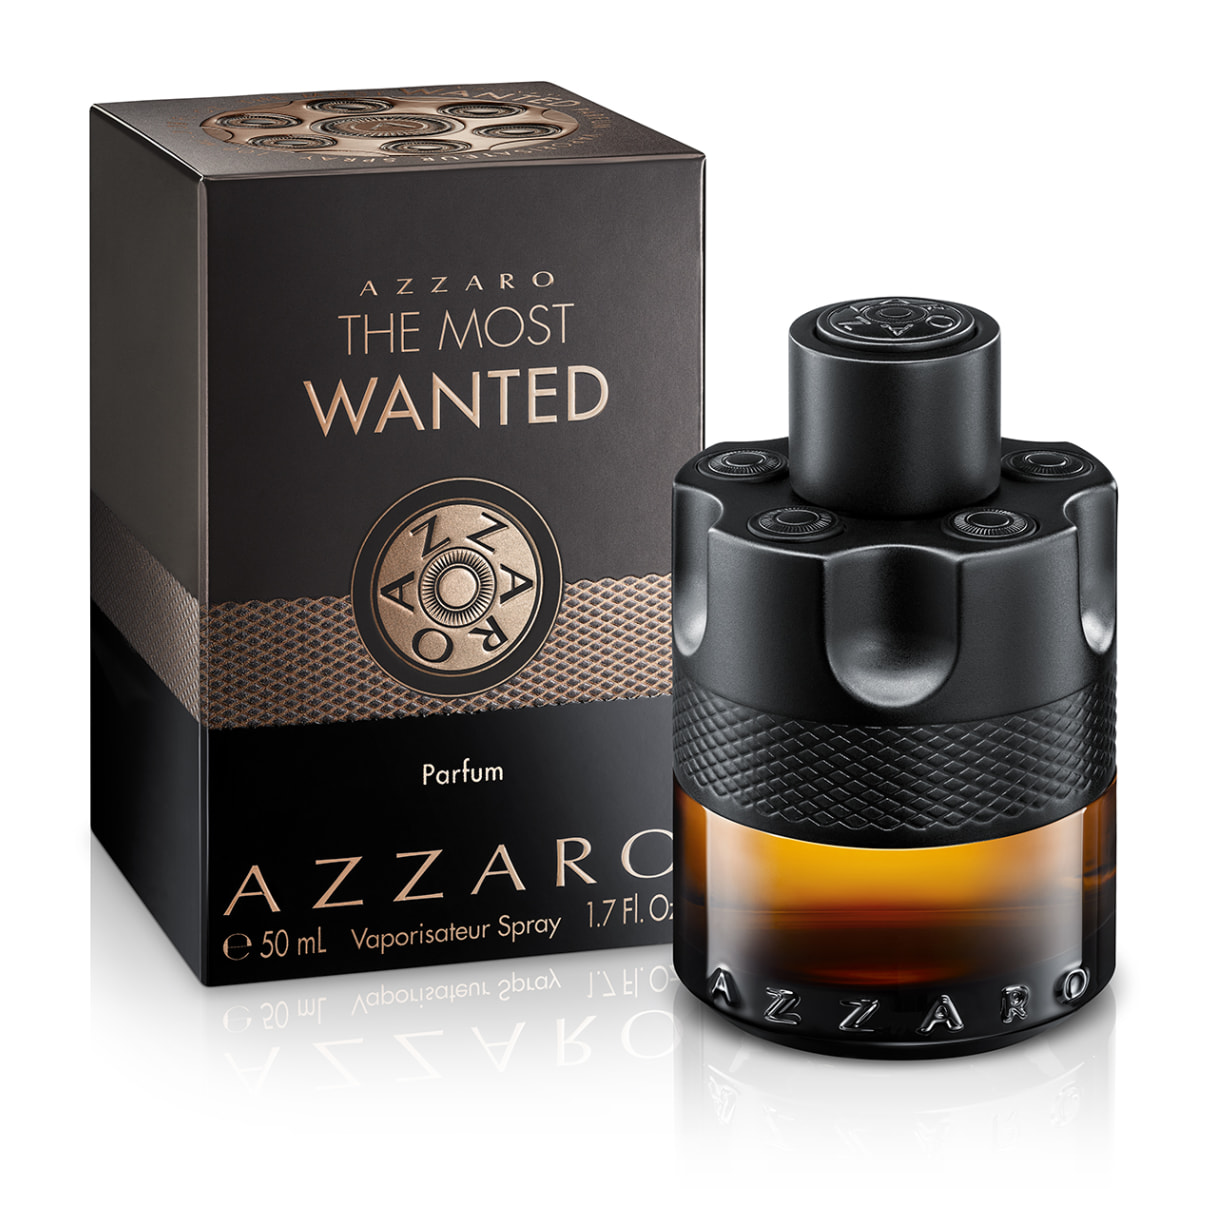 Azzaro The Most Wanted 50ml - Parfum